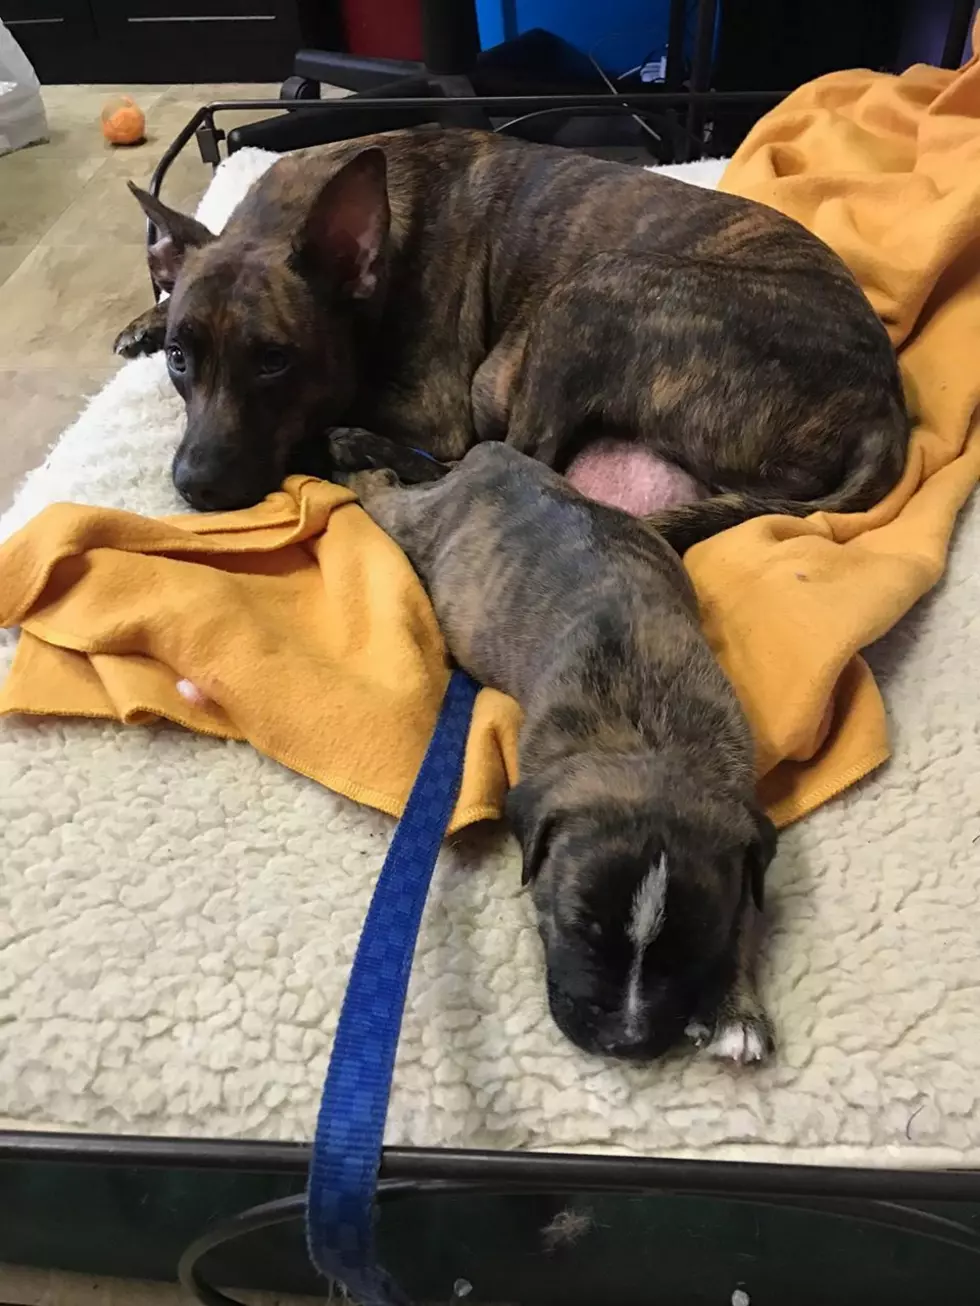 Evansville Rescue Calls off Search for Missing Puppies